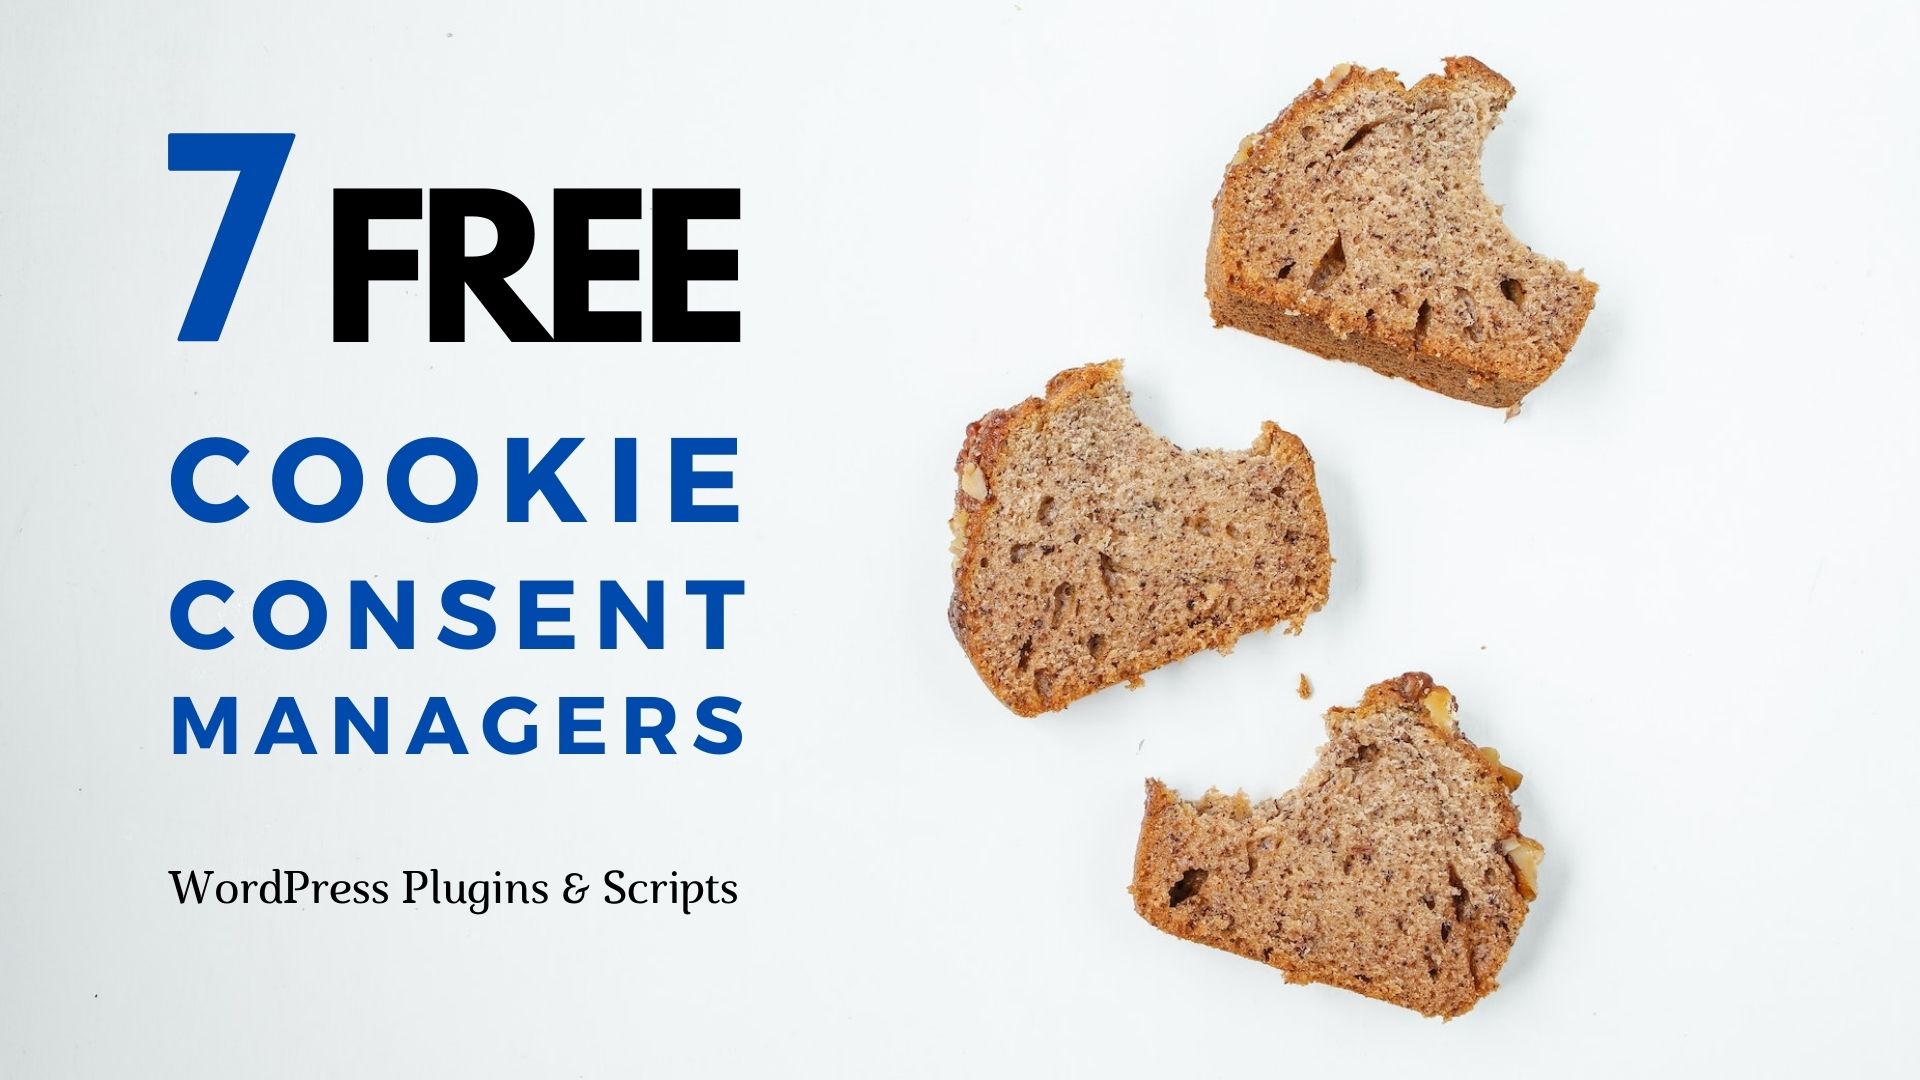 7 Free Cookie Consent Managers - WordPress Plugins and Scripts